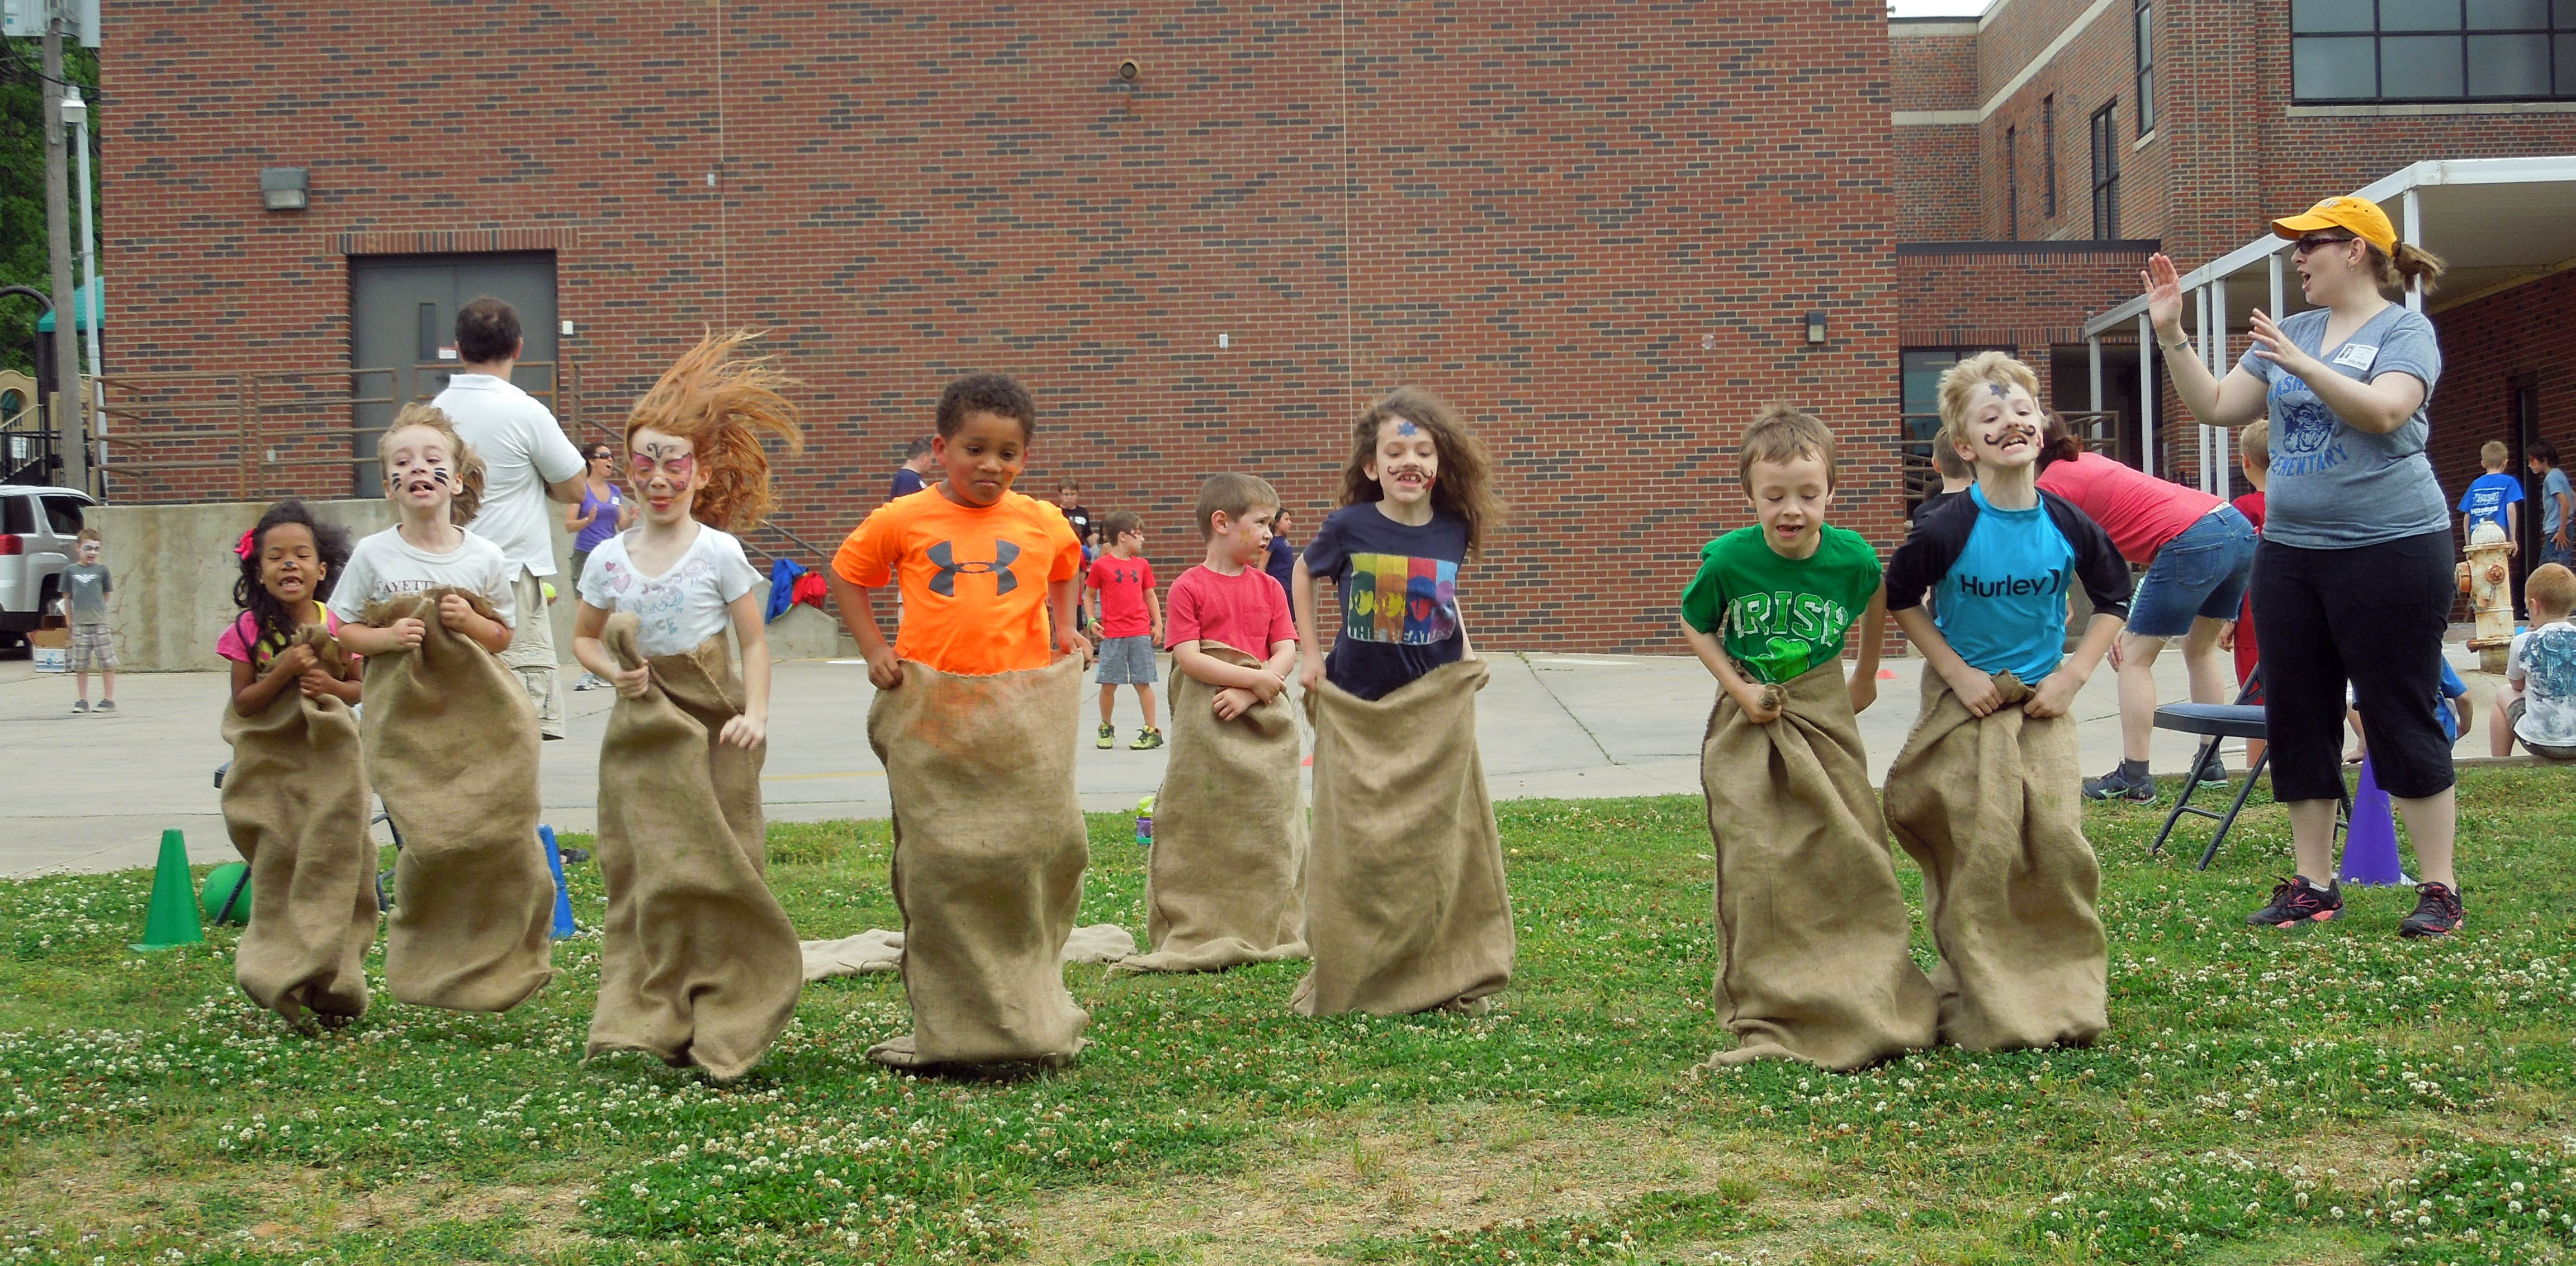 Potato Sack Race
 Field Day Let the games begin